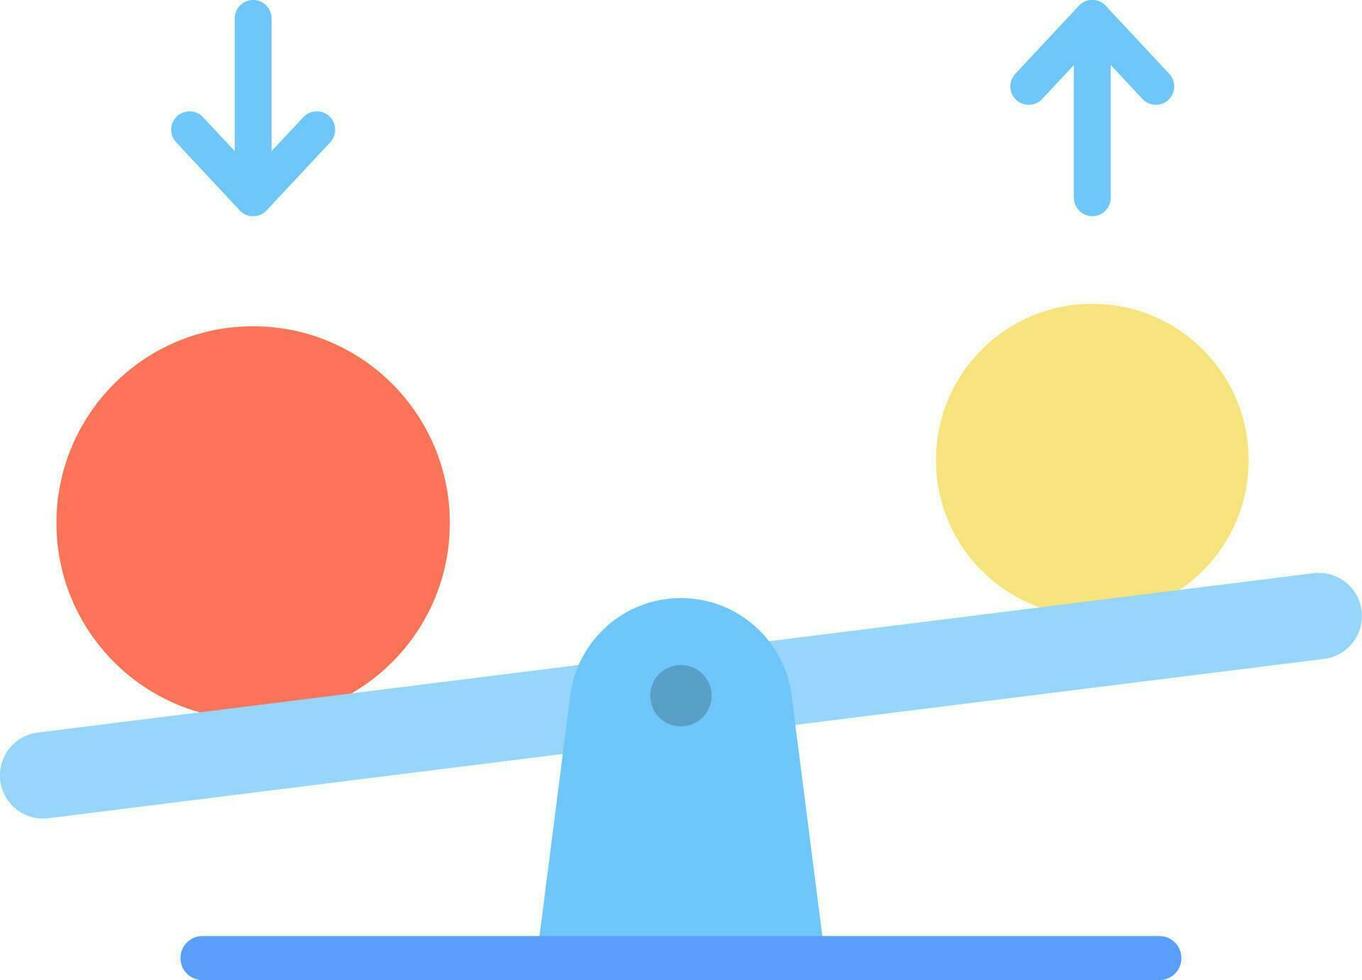 Seesaw icon vector image.